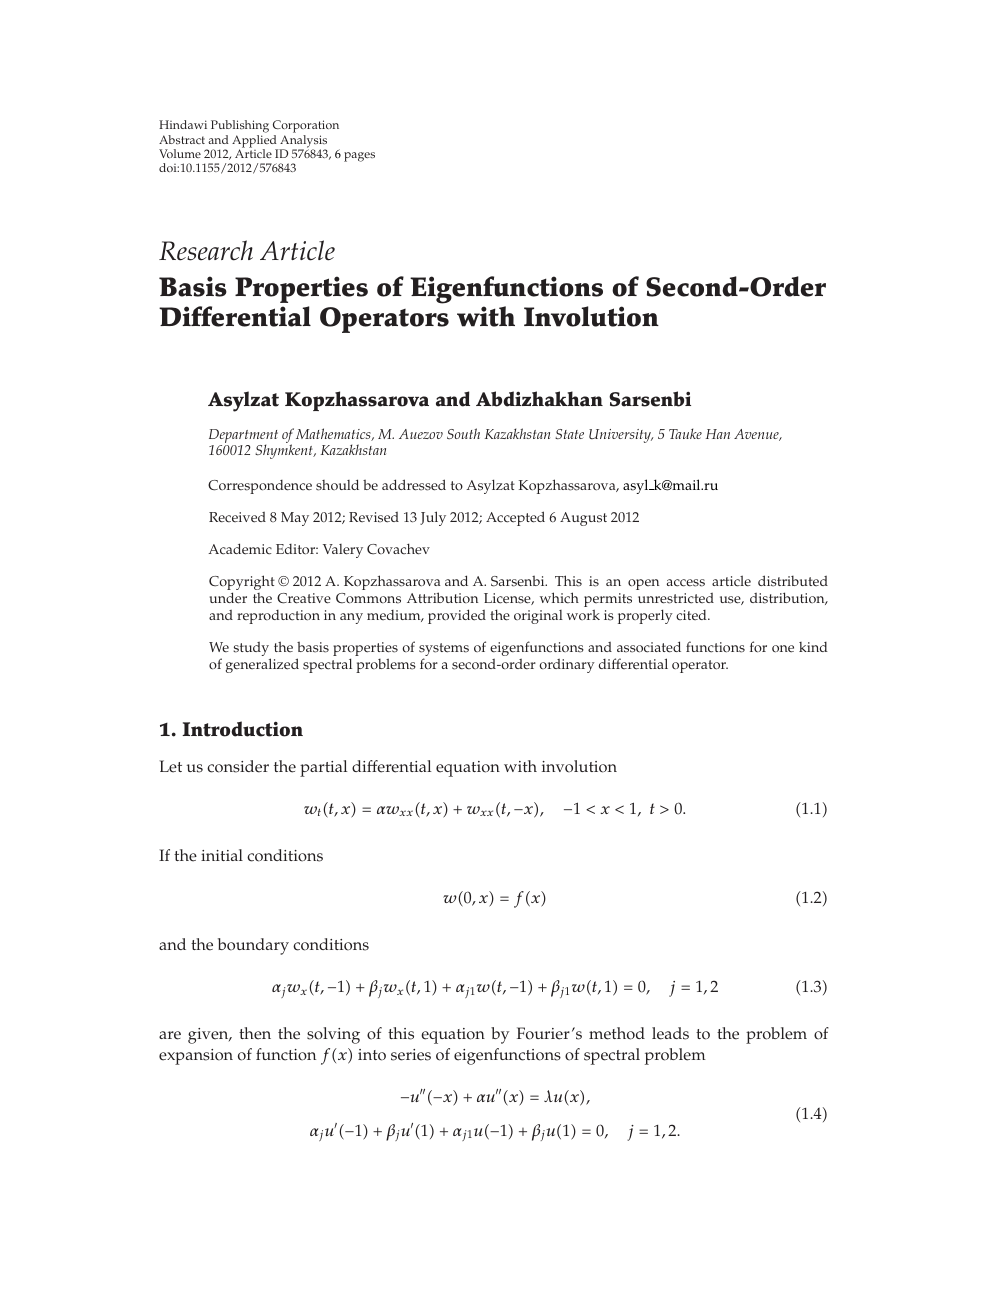 Basis Properties Of Eigenfunctions Of Second Order Differential Operators With Involution Topic Of Research Paper In Mathematics Download Scholarly Article Pdf And Read For Free On Cyberleninka Open Science Hub